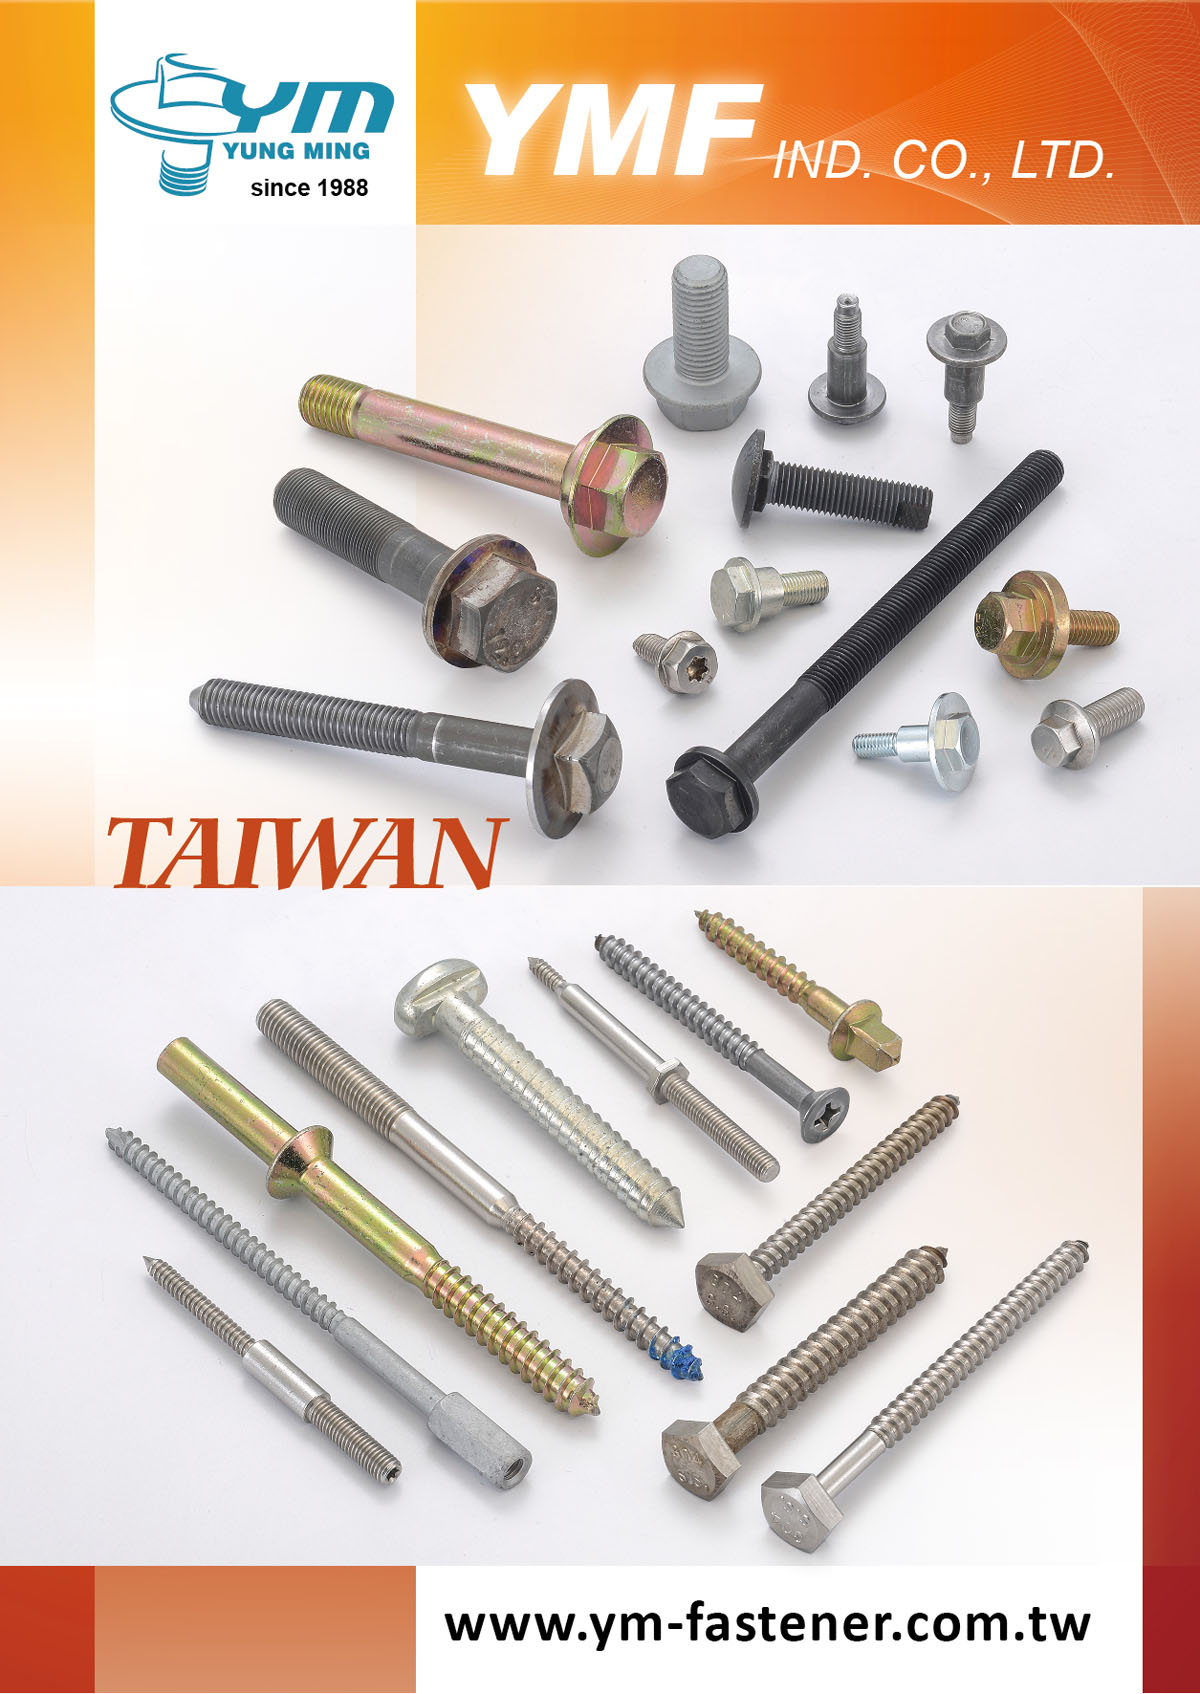 YUNG MING FASTENER INDUSTRIAL CO., LTD. Online Catalogues